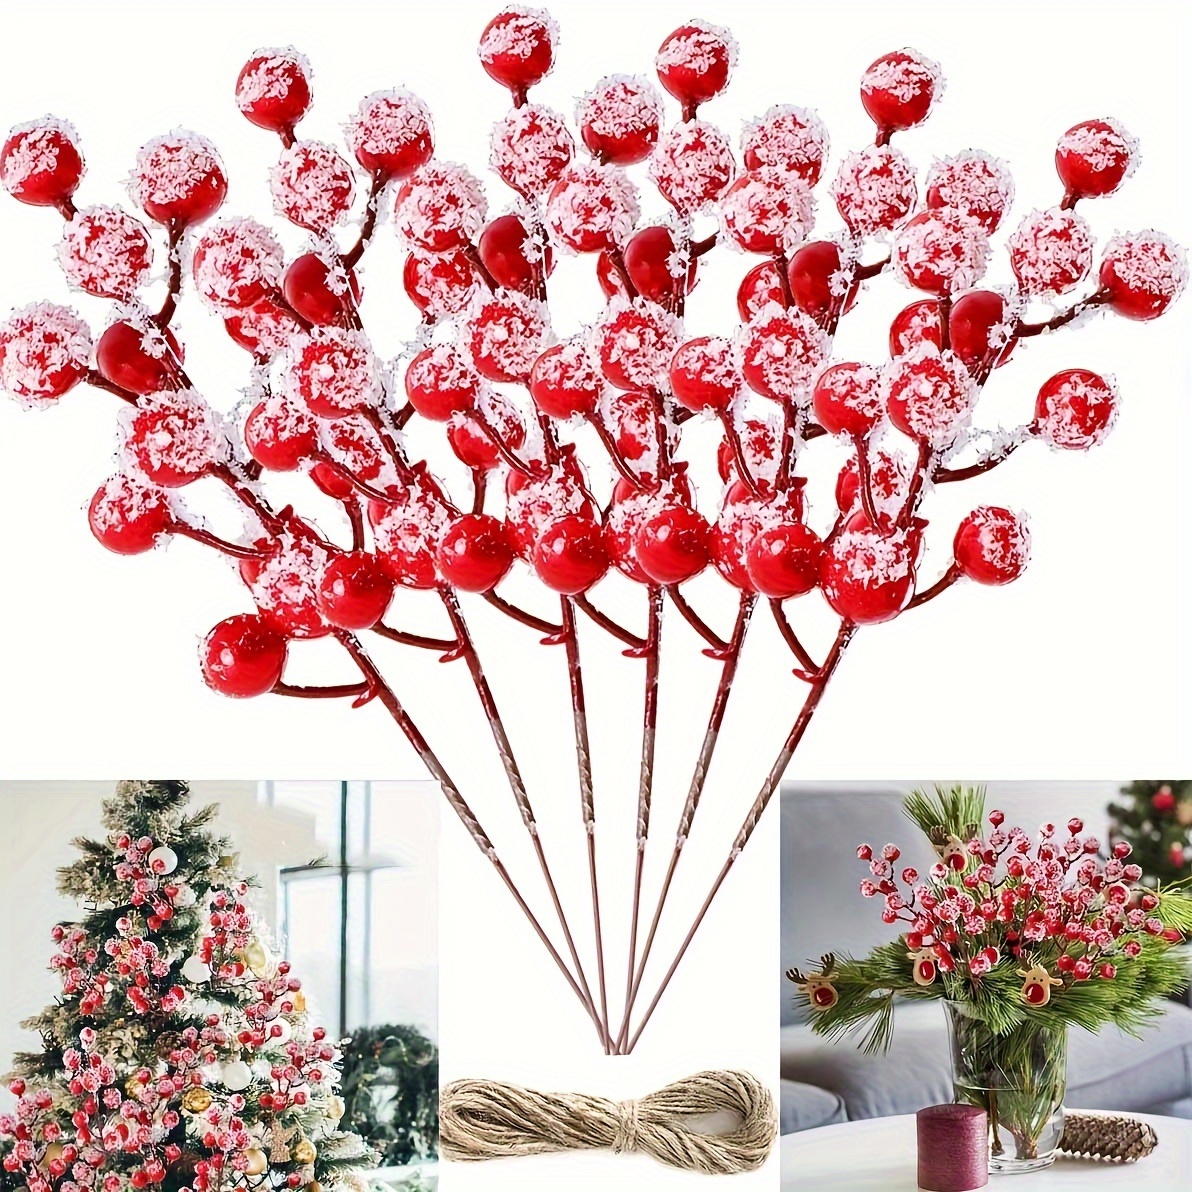 Set of 12: 17-Inch Red & White Holly Berry Stems with 35 Lifelike Berries, Christmas Berries, Party & Event, Home & Office Decor